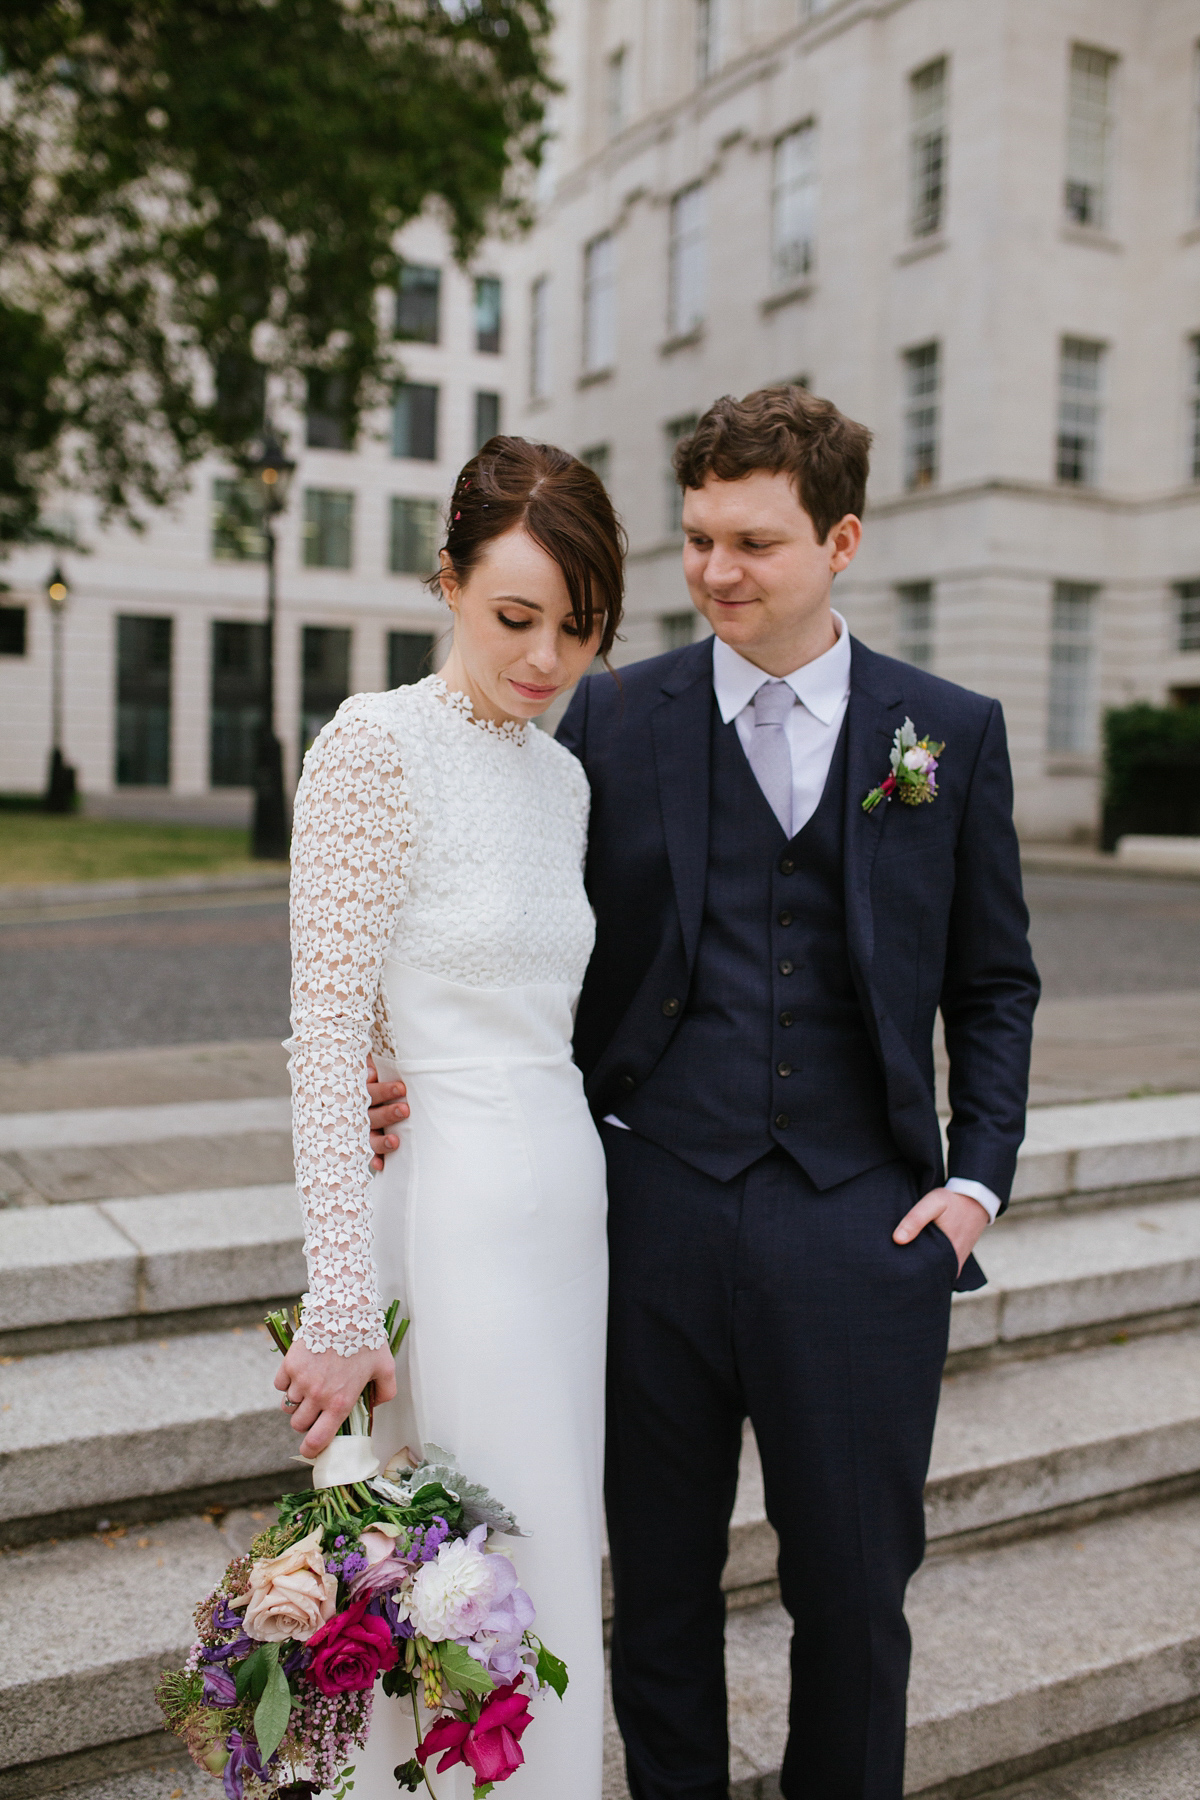 Faye wore a long sleeved, backless Self Portrait dress for her fuss-free, chic and modern wedding at the ICA in London. Photography by Emma Case.